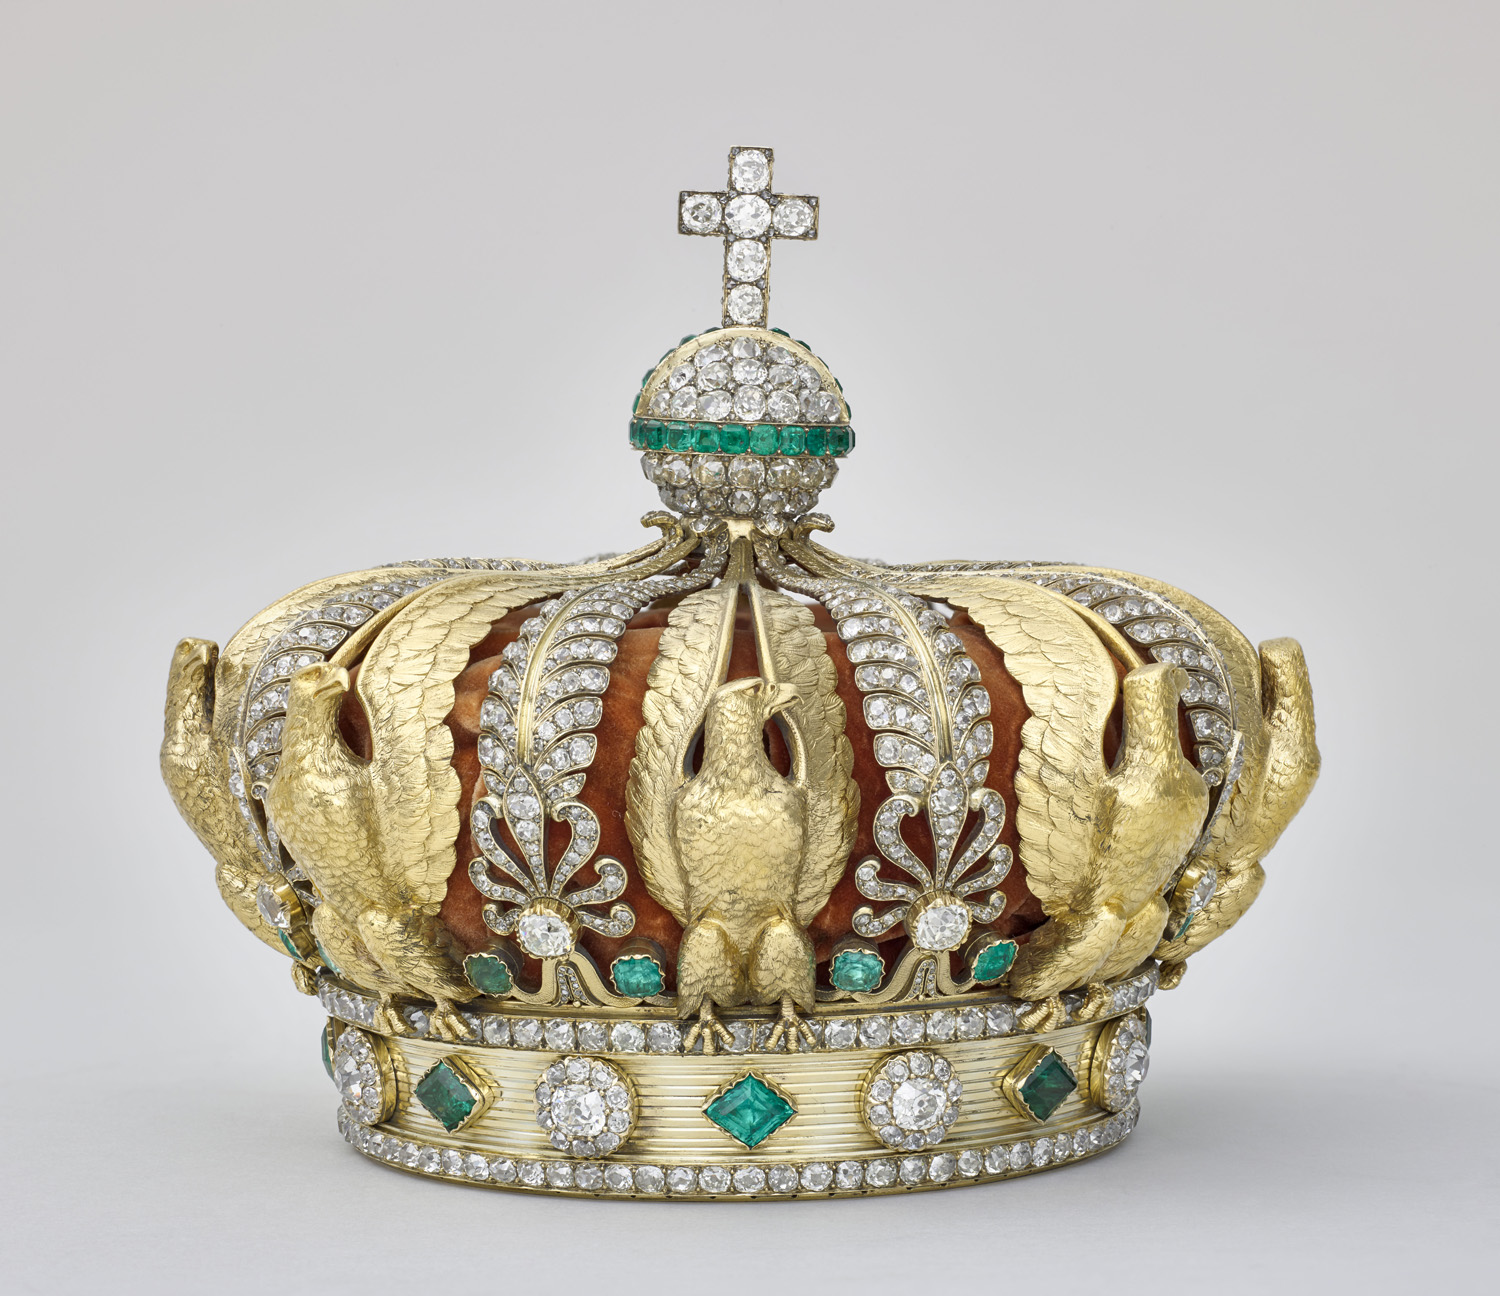 Sparkly Splendour: The Galerie d'Apollon and the French Crown